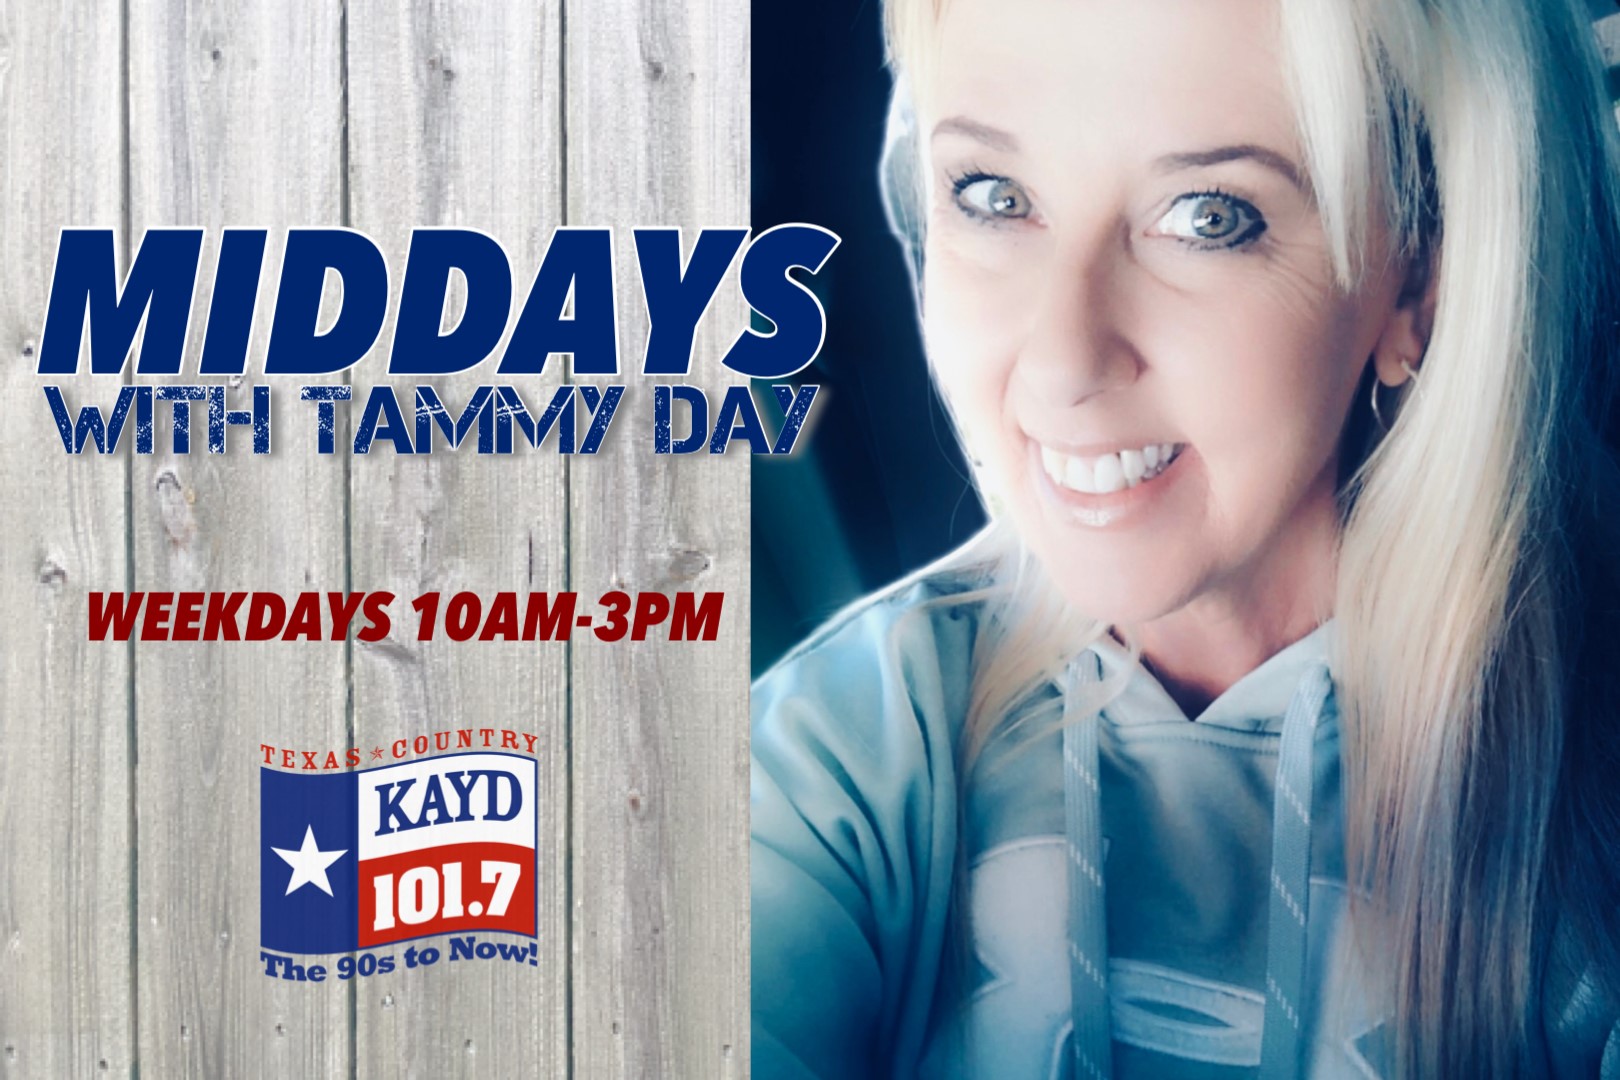 Listen while you work to Tammy Daye and the new Texas Country KD 101.7